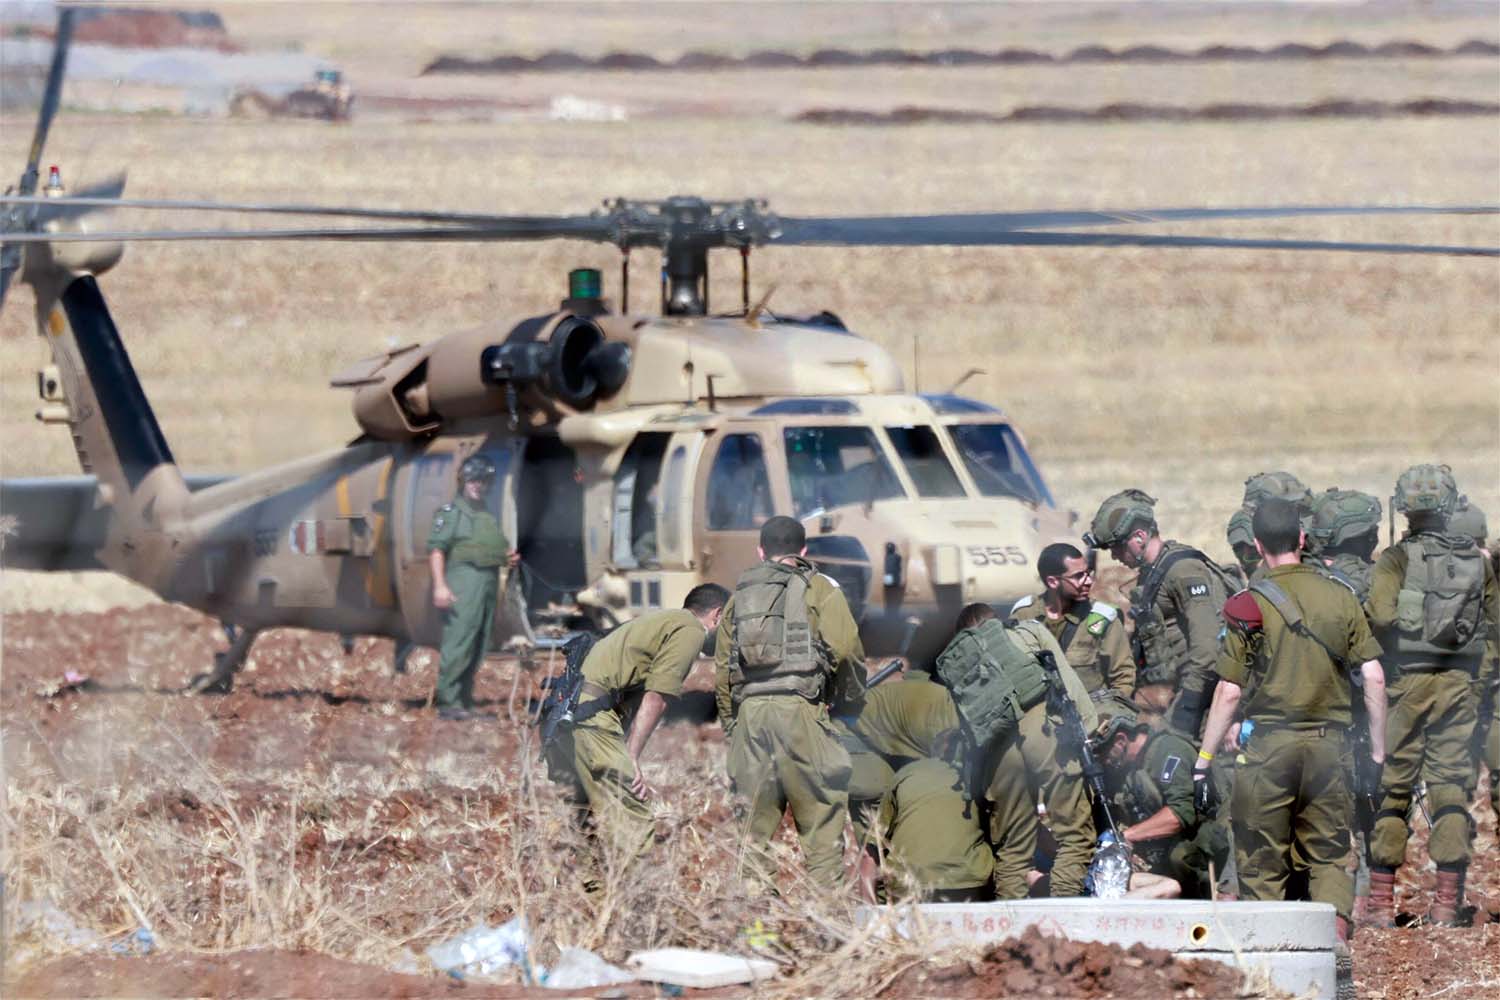 The military operation is involving hundreds of Israeli troops